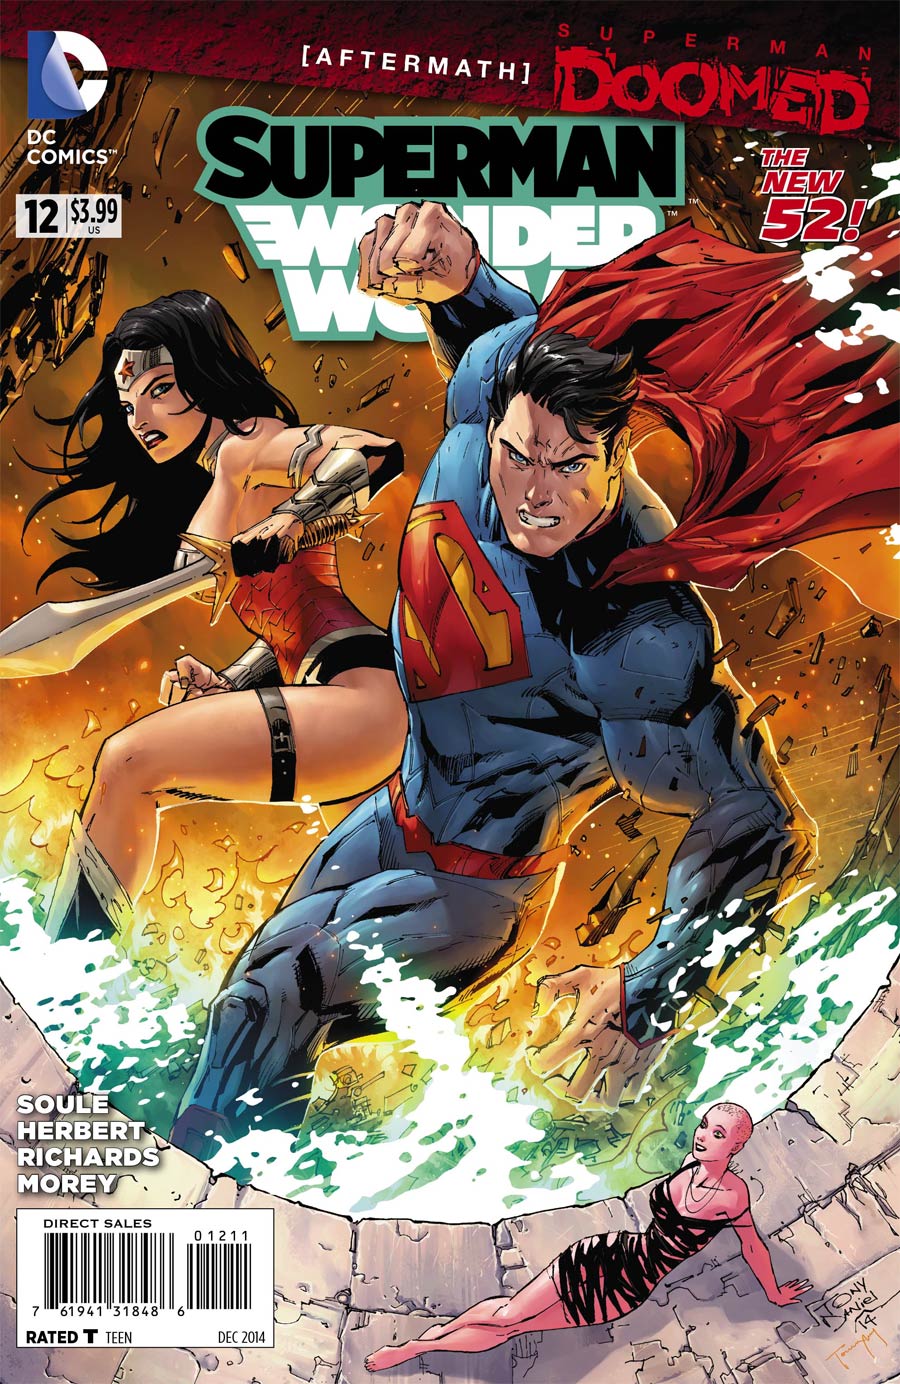 Superman Wonder Woman #12 Cover C Combo Pack With Polybag (Superman Doomed Aftermath)